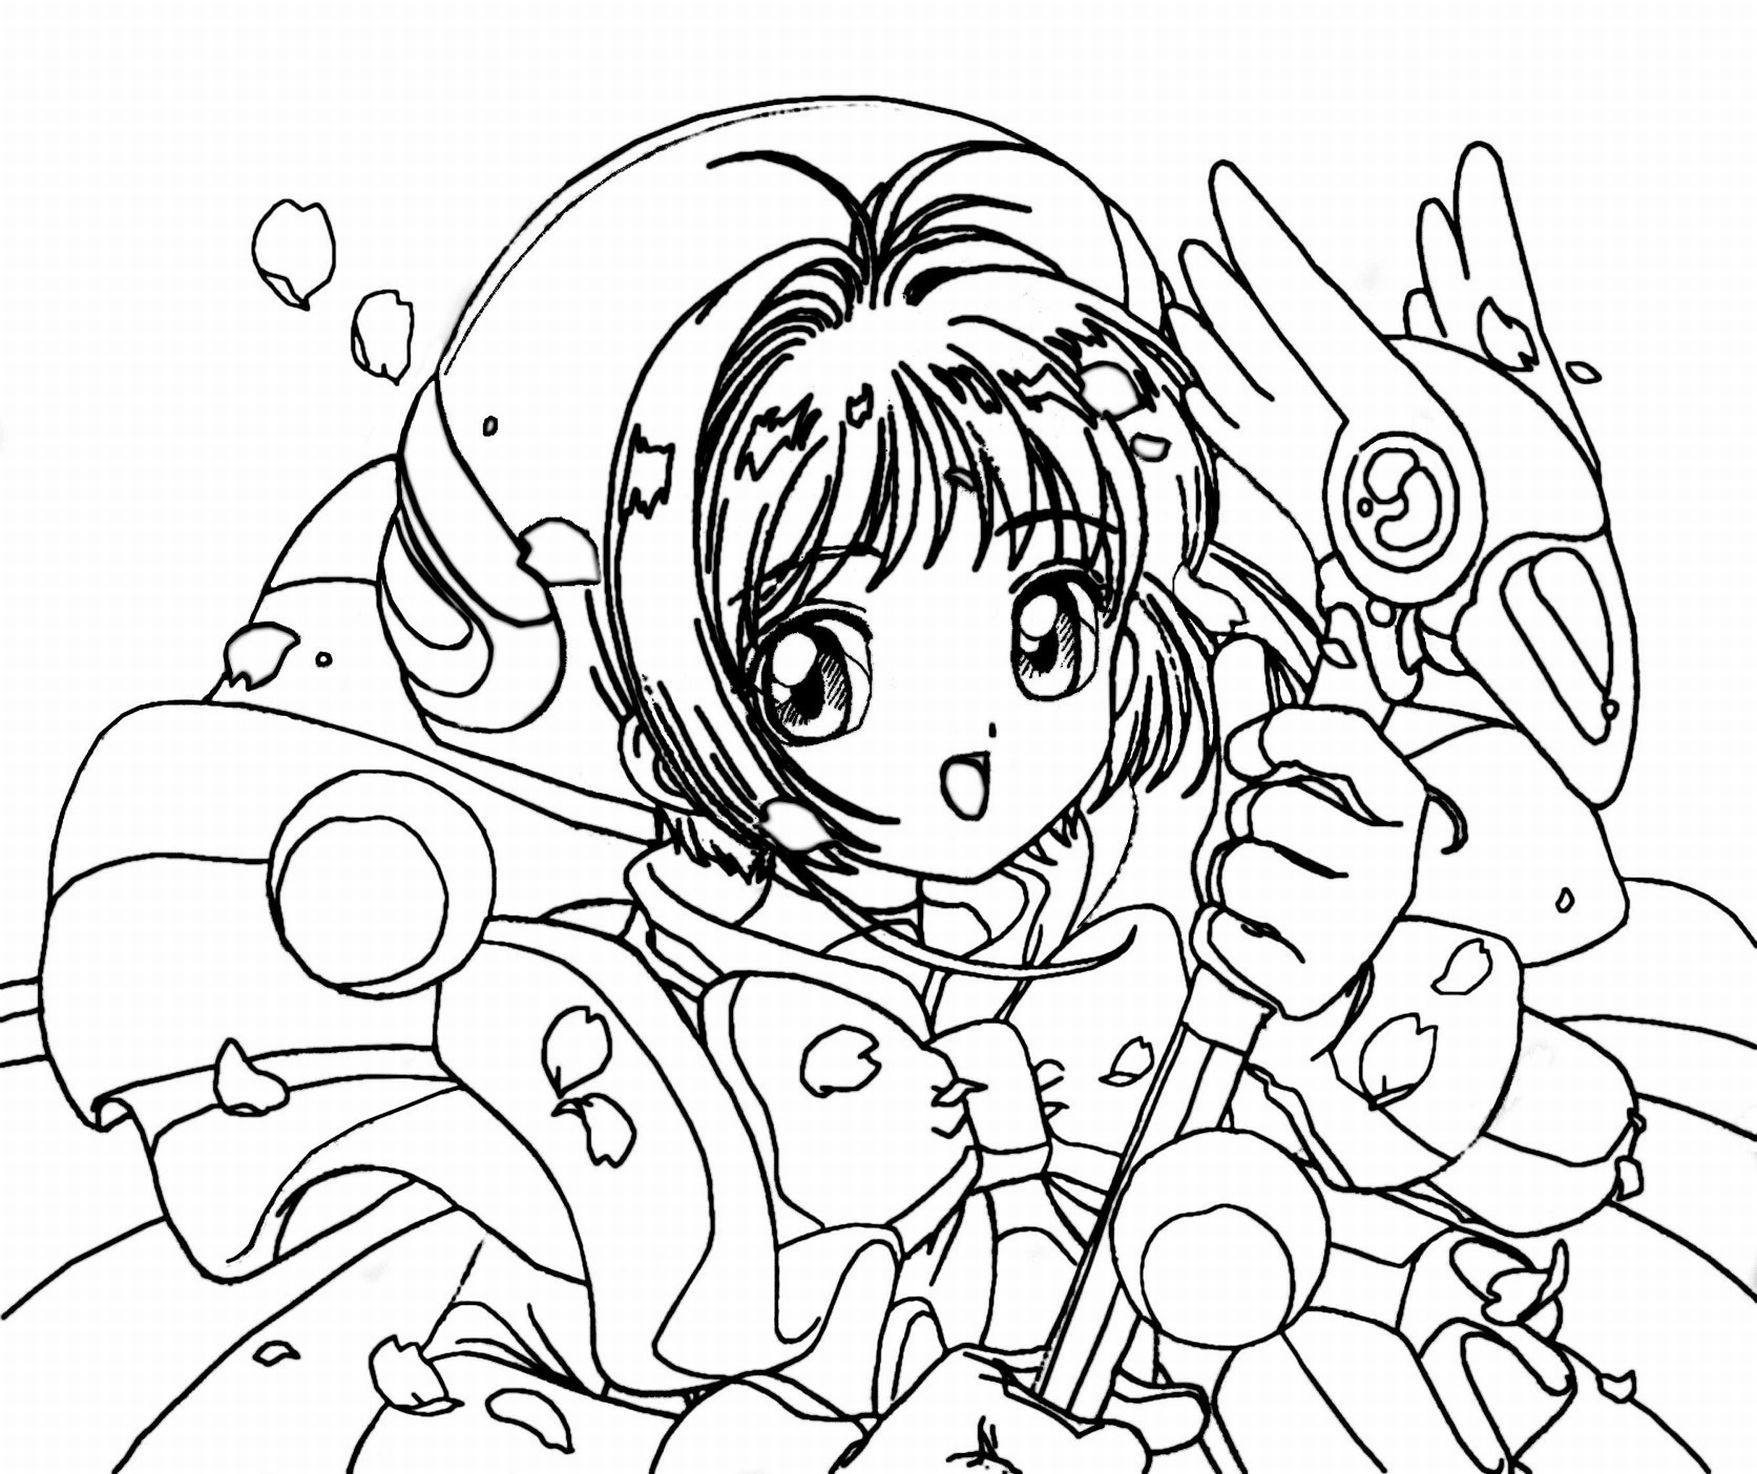 Anime Characters Coloring Pages at GetColorings.com | Free ...